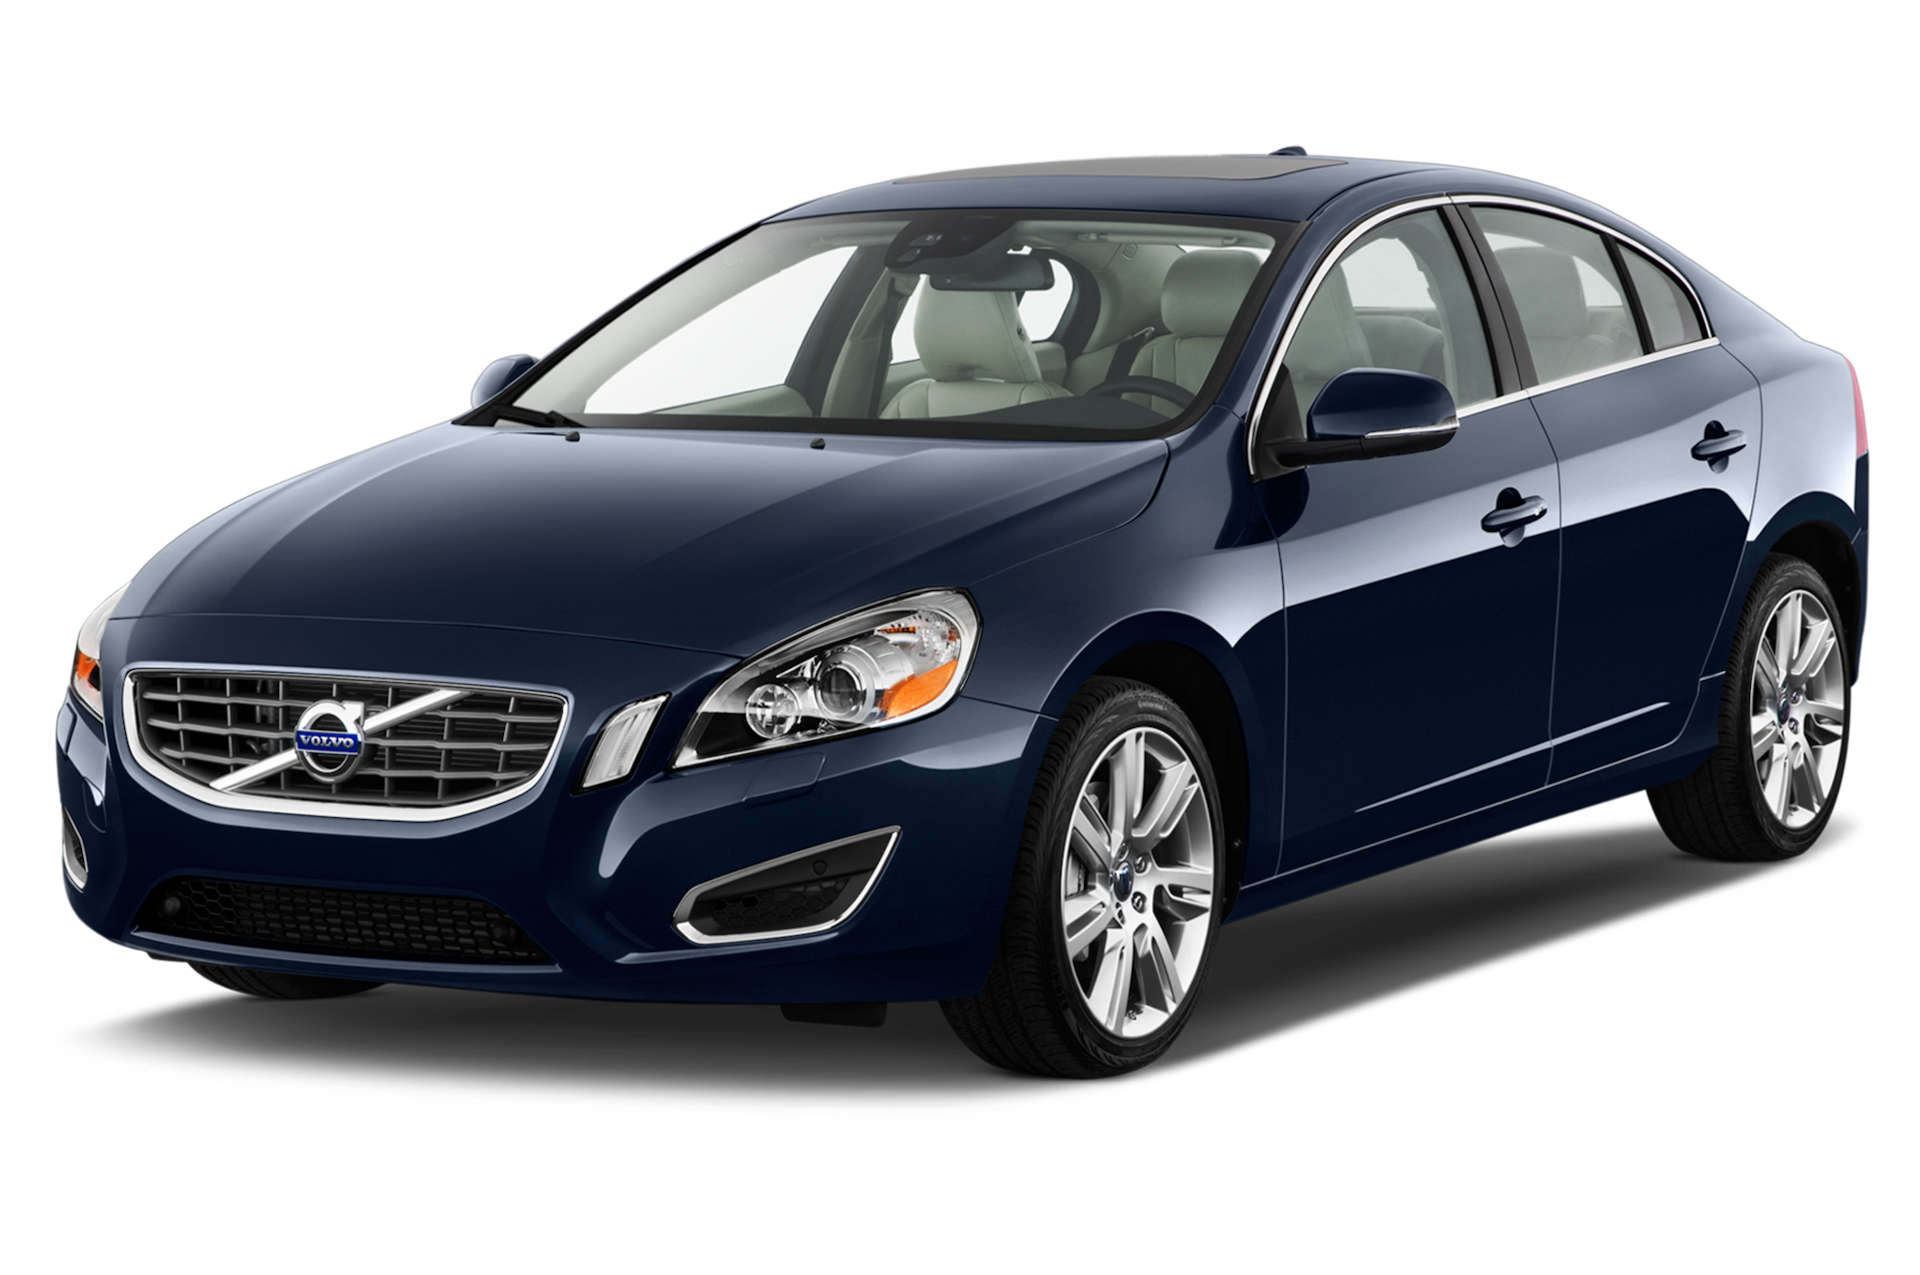 2012 Volvo S60 Prices, Reviews, and Photos - MotorTrend